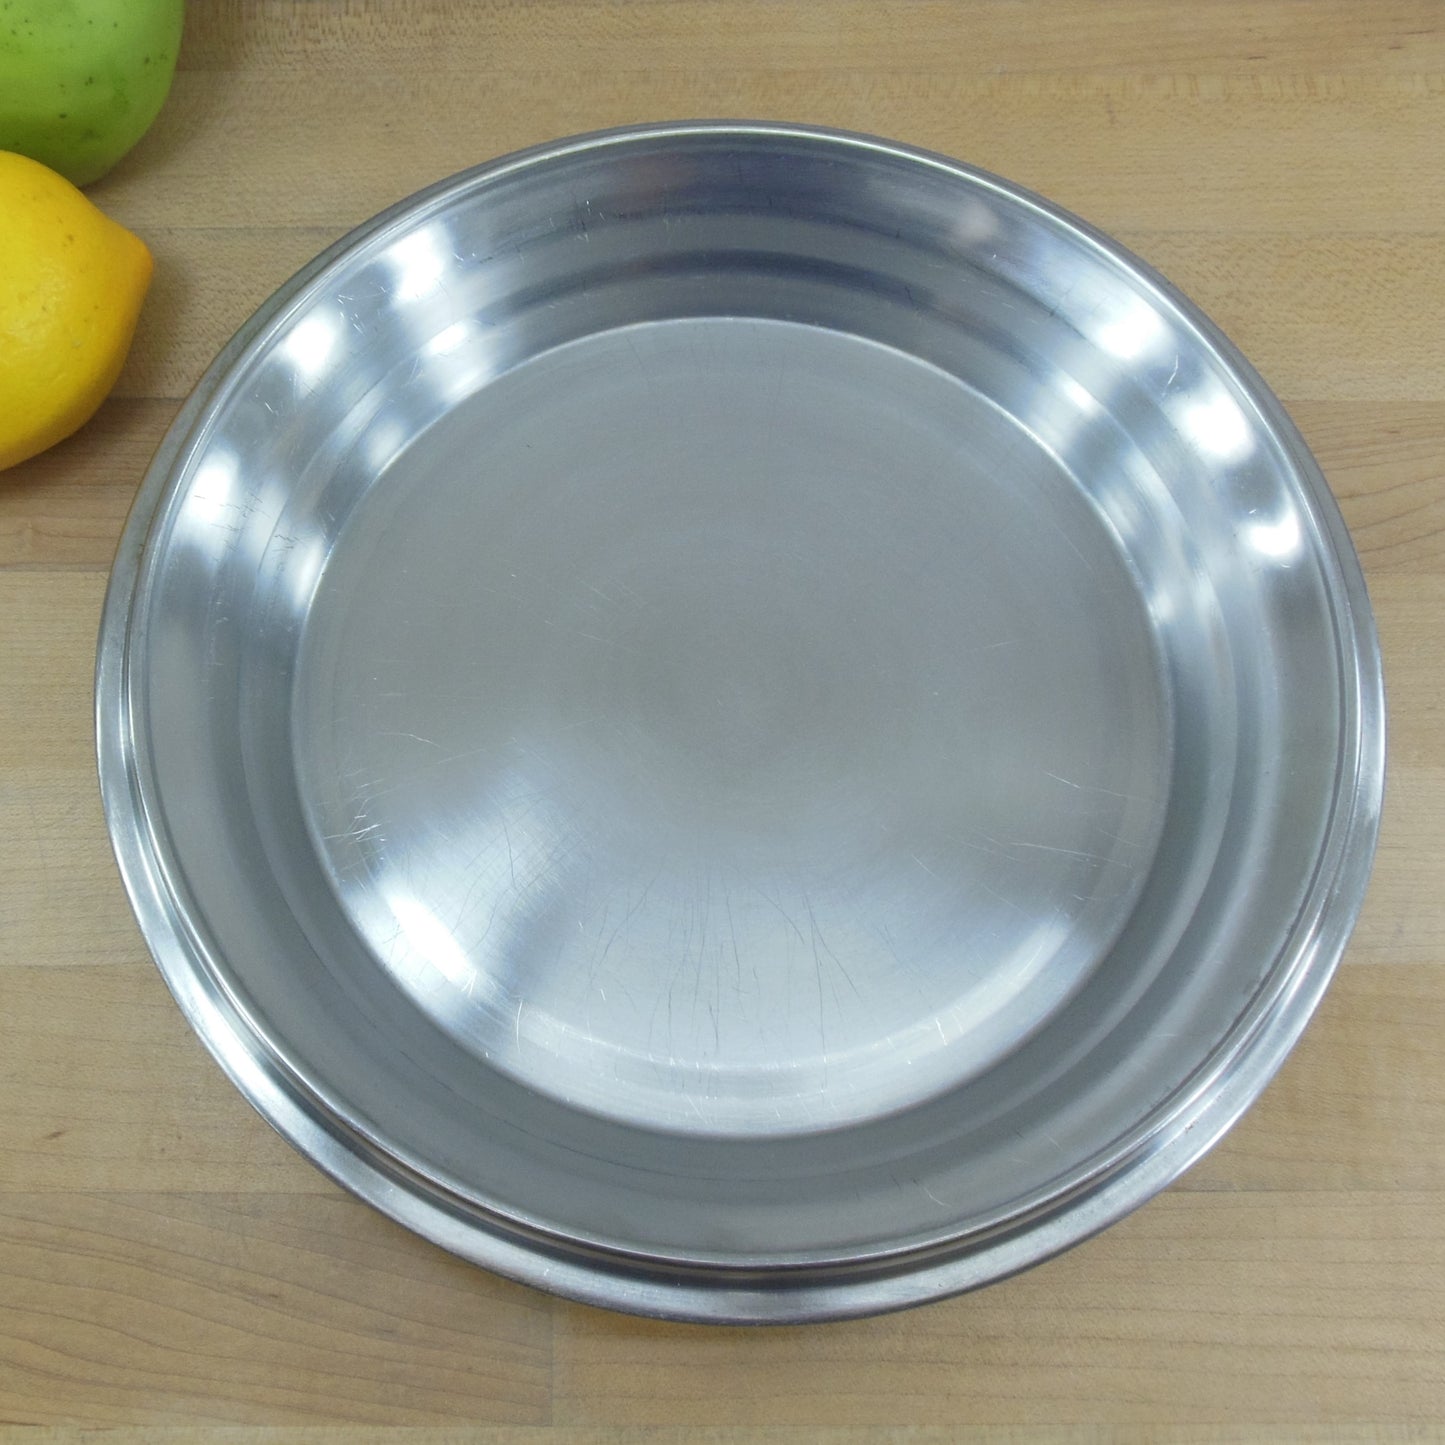 Dietary Products Japan 18-8 Insulated Stainless Steel 9" Pie Pan Dish vintage